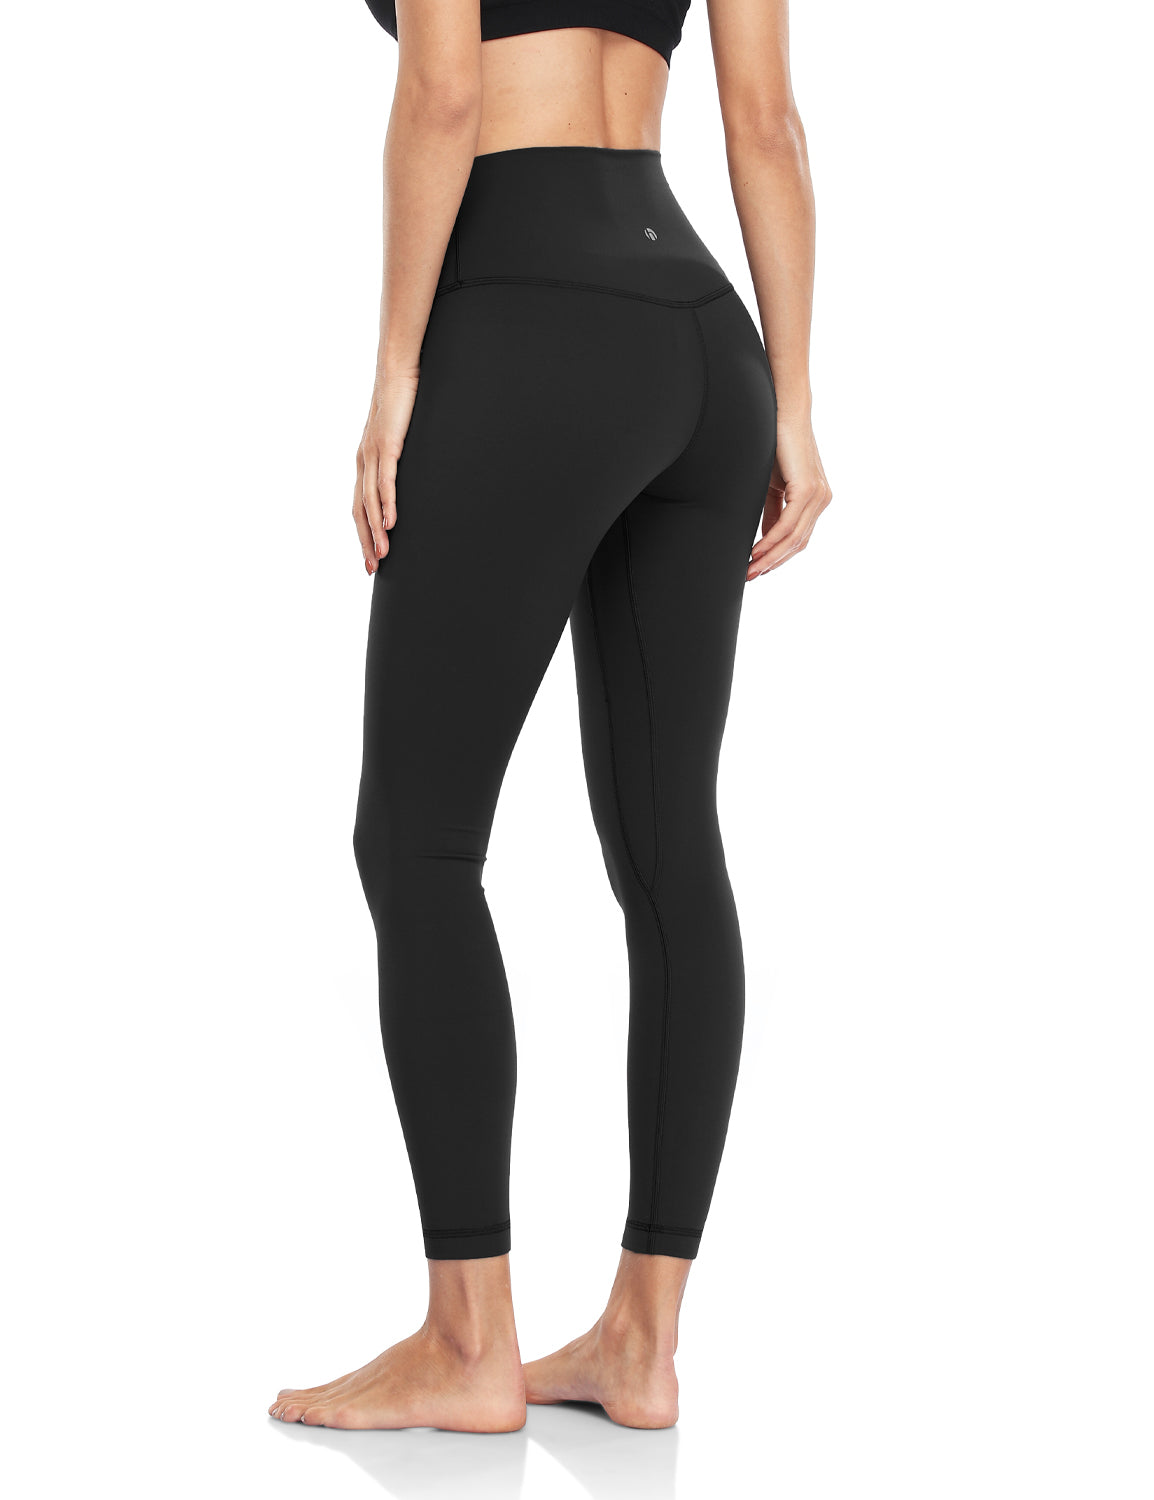 HeyNuts Essential Full Length Yoga Leggings, Women's High Waisted Workout  Compre